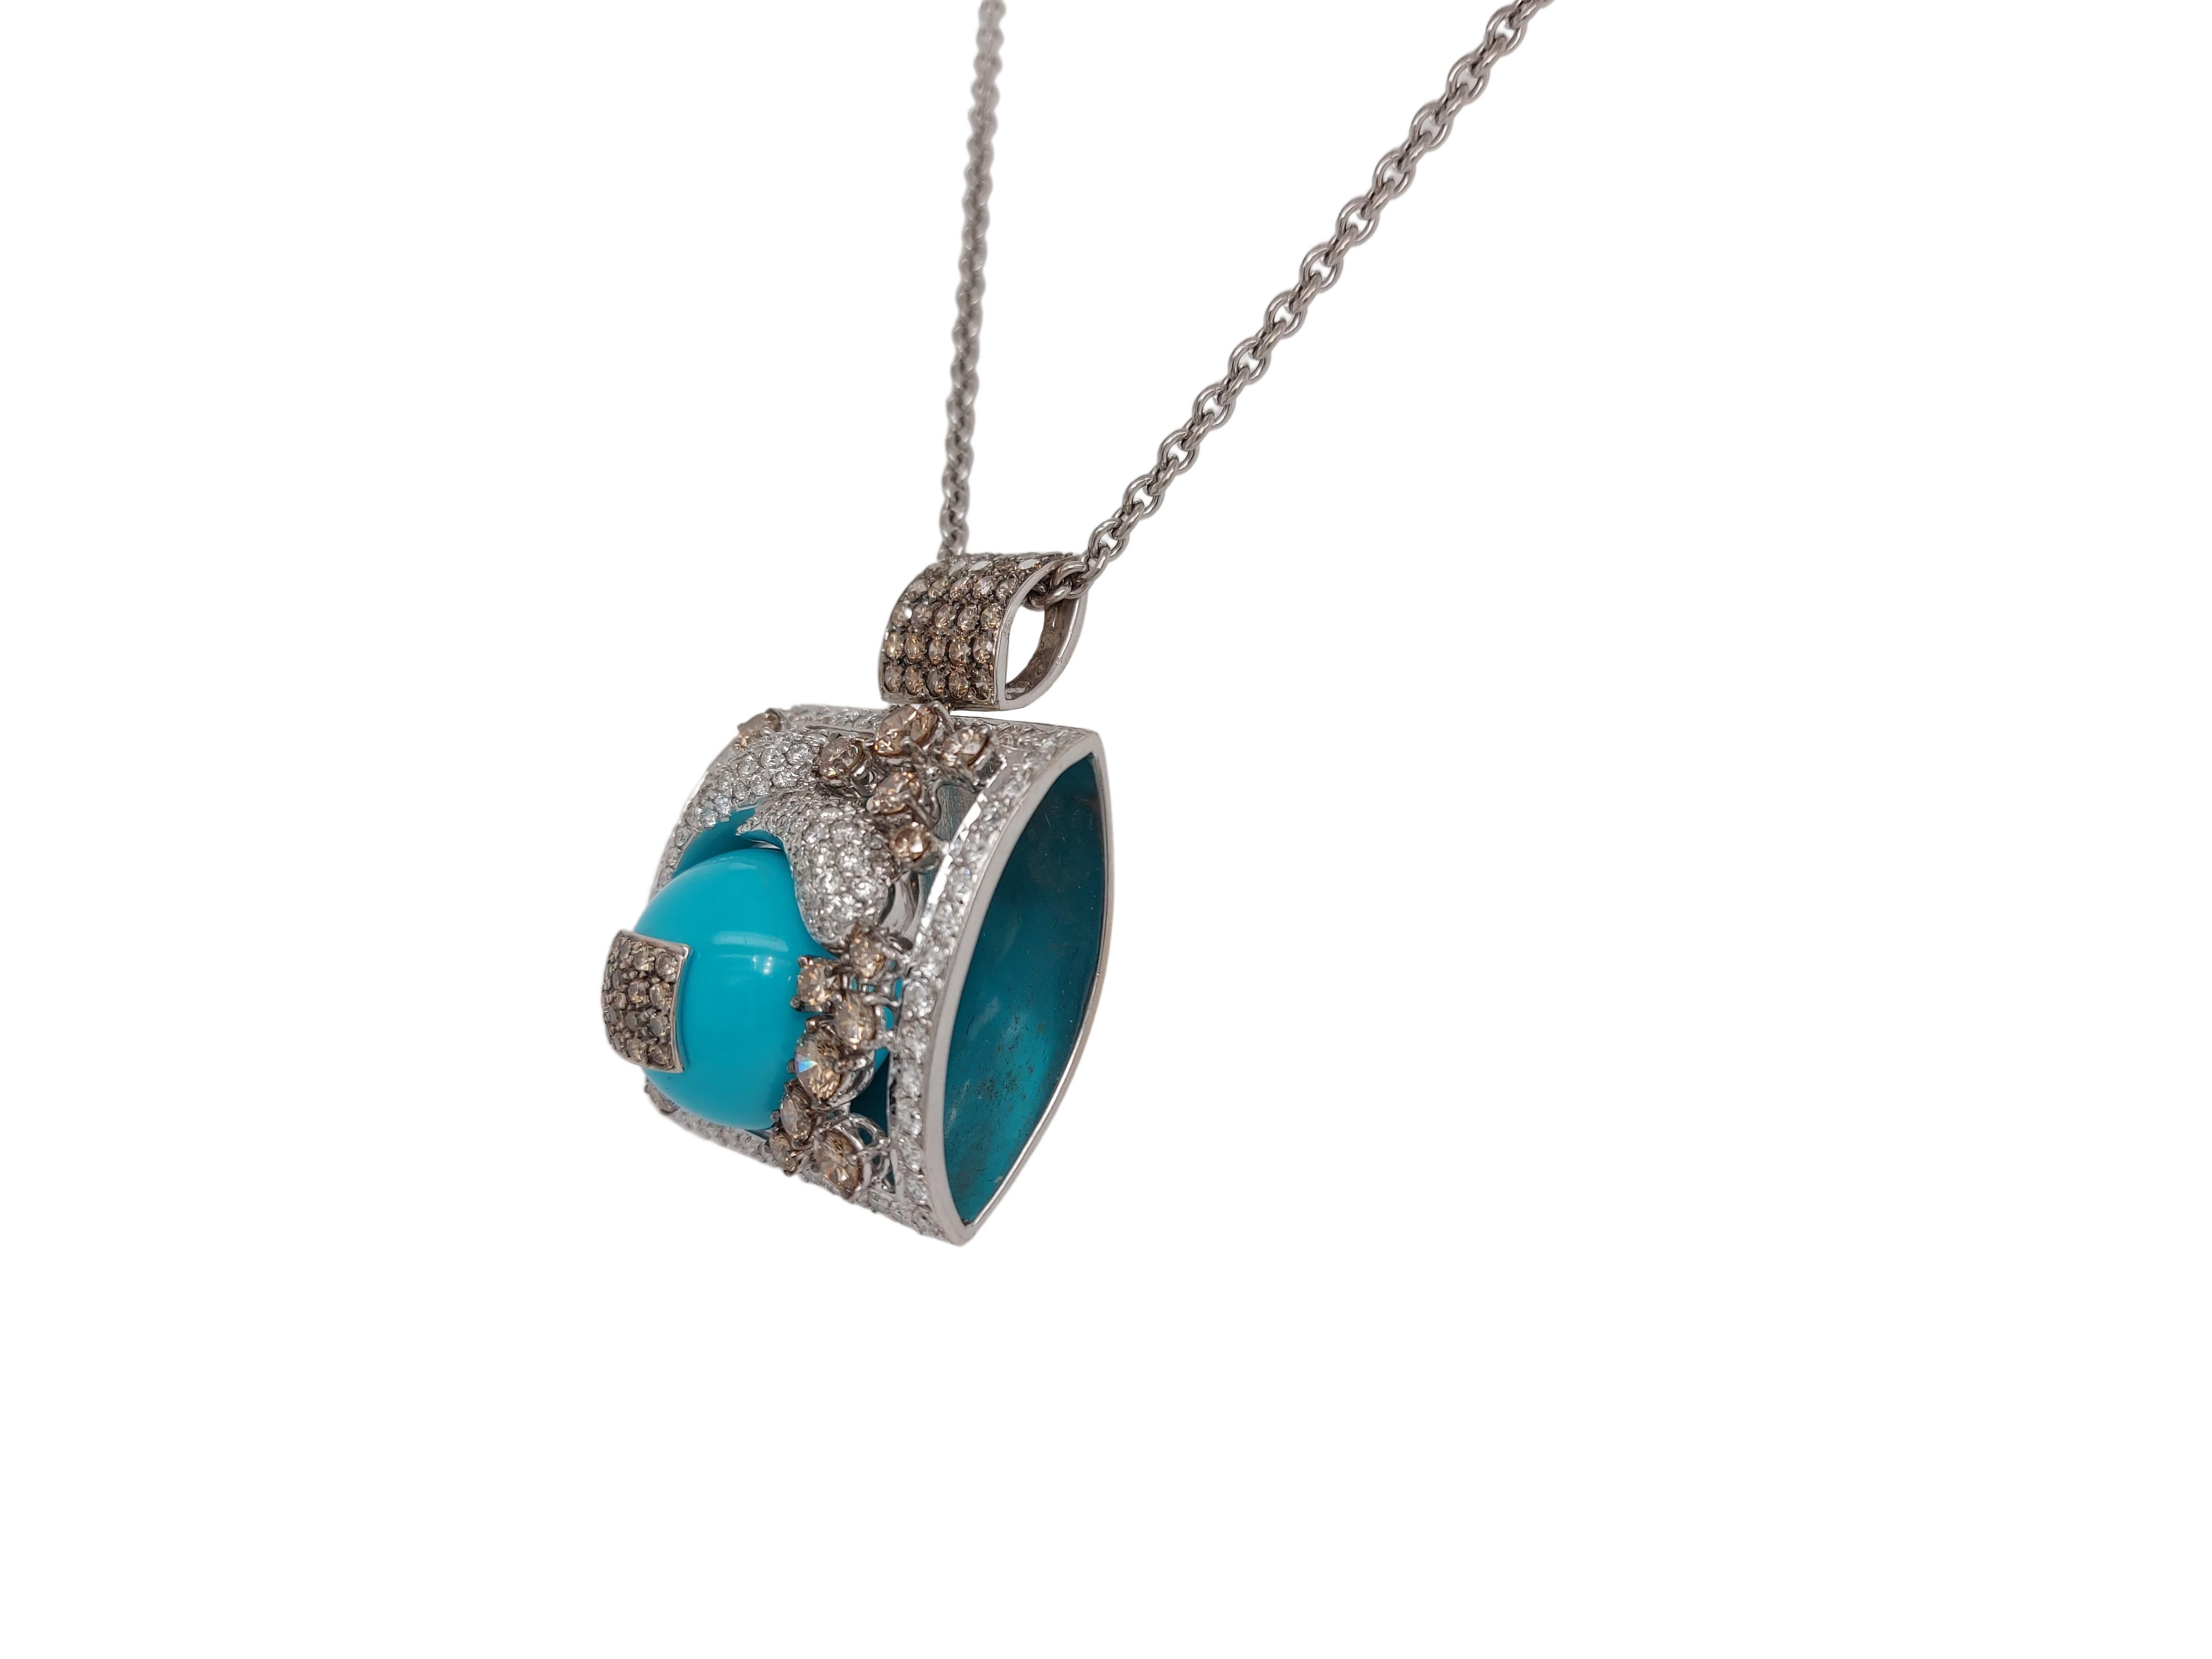 Stunning 18kt White Gold Pendant / Necklace with Turquoise and Diamonds 4